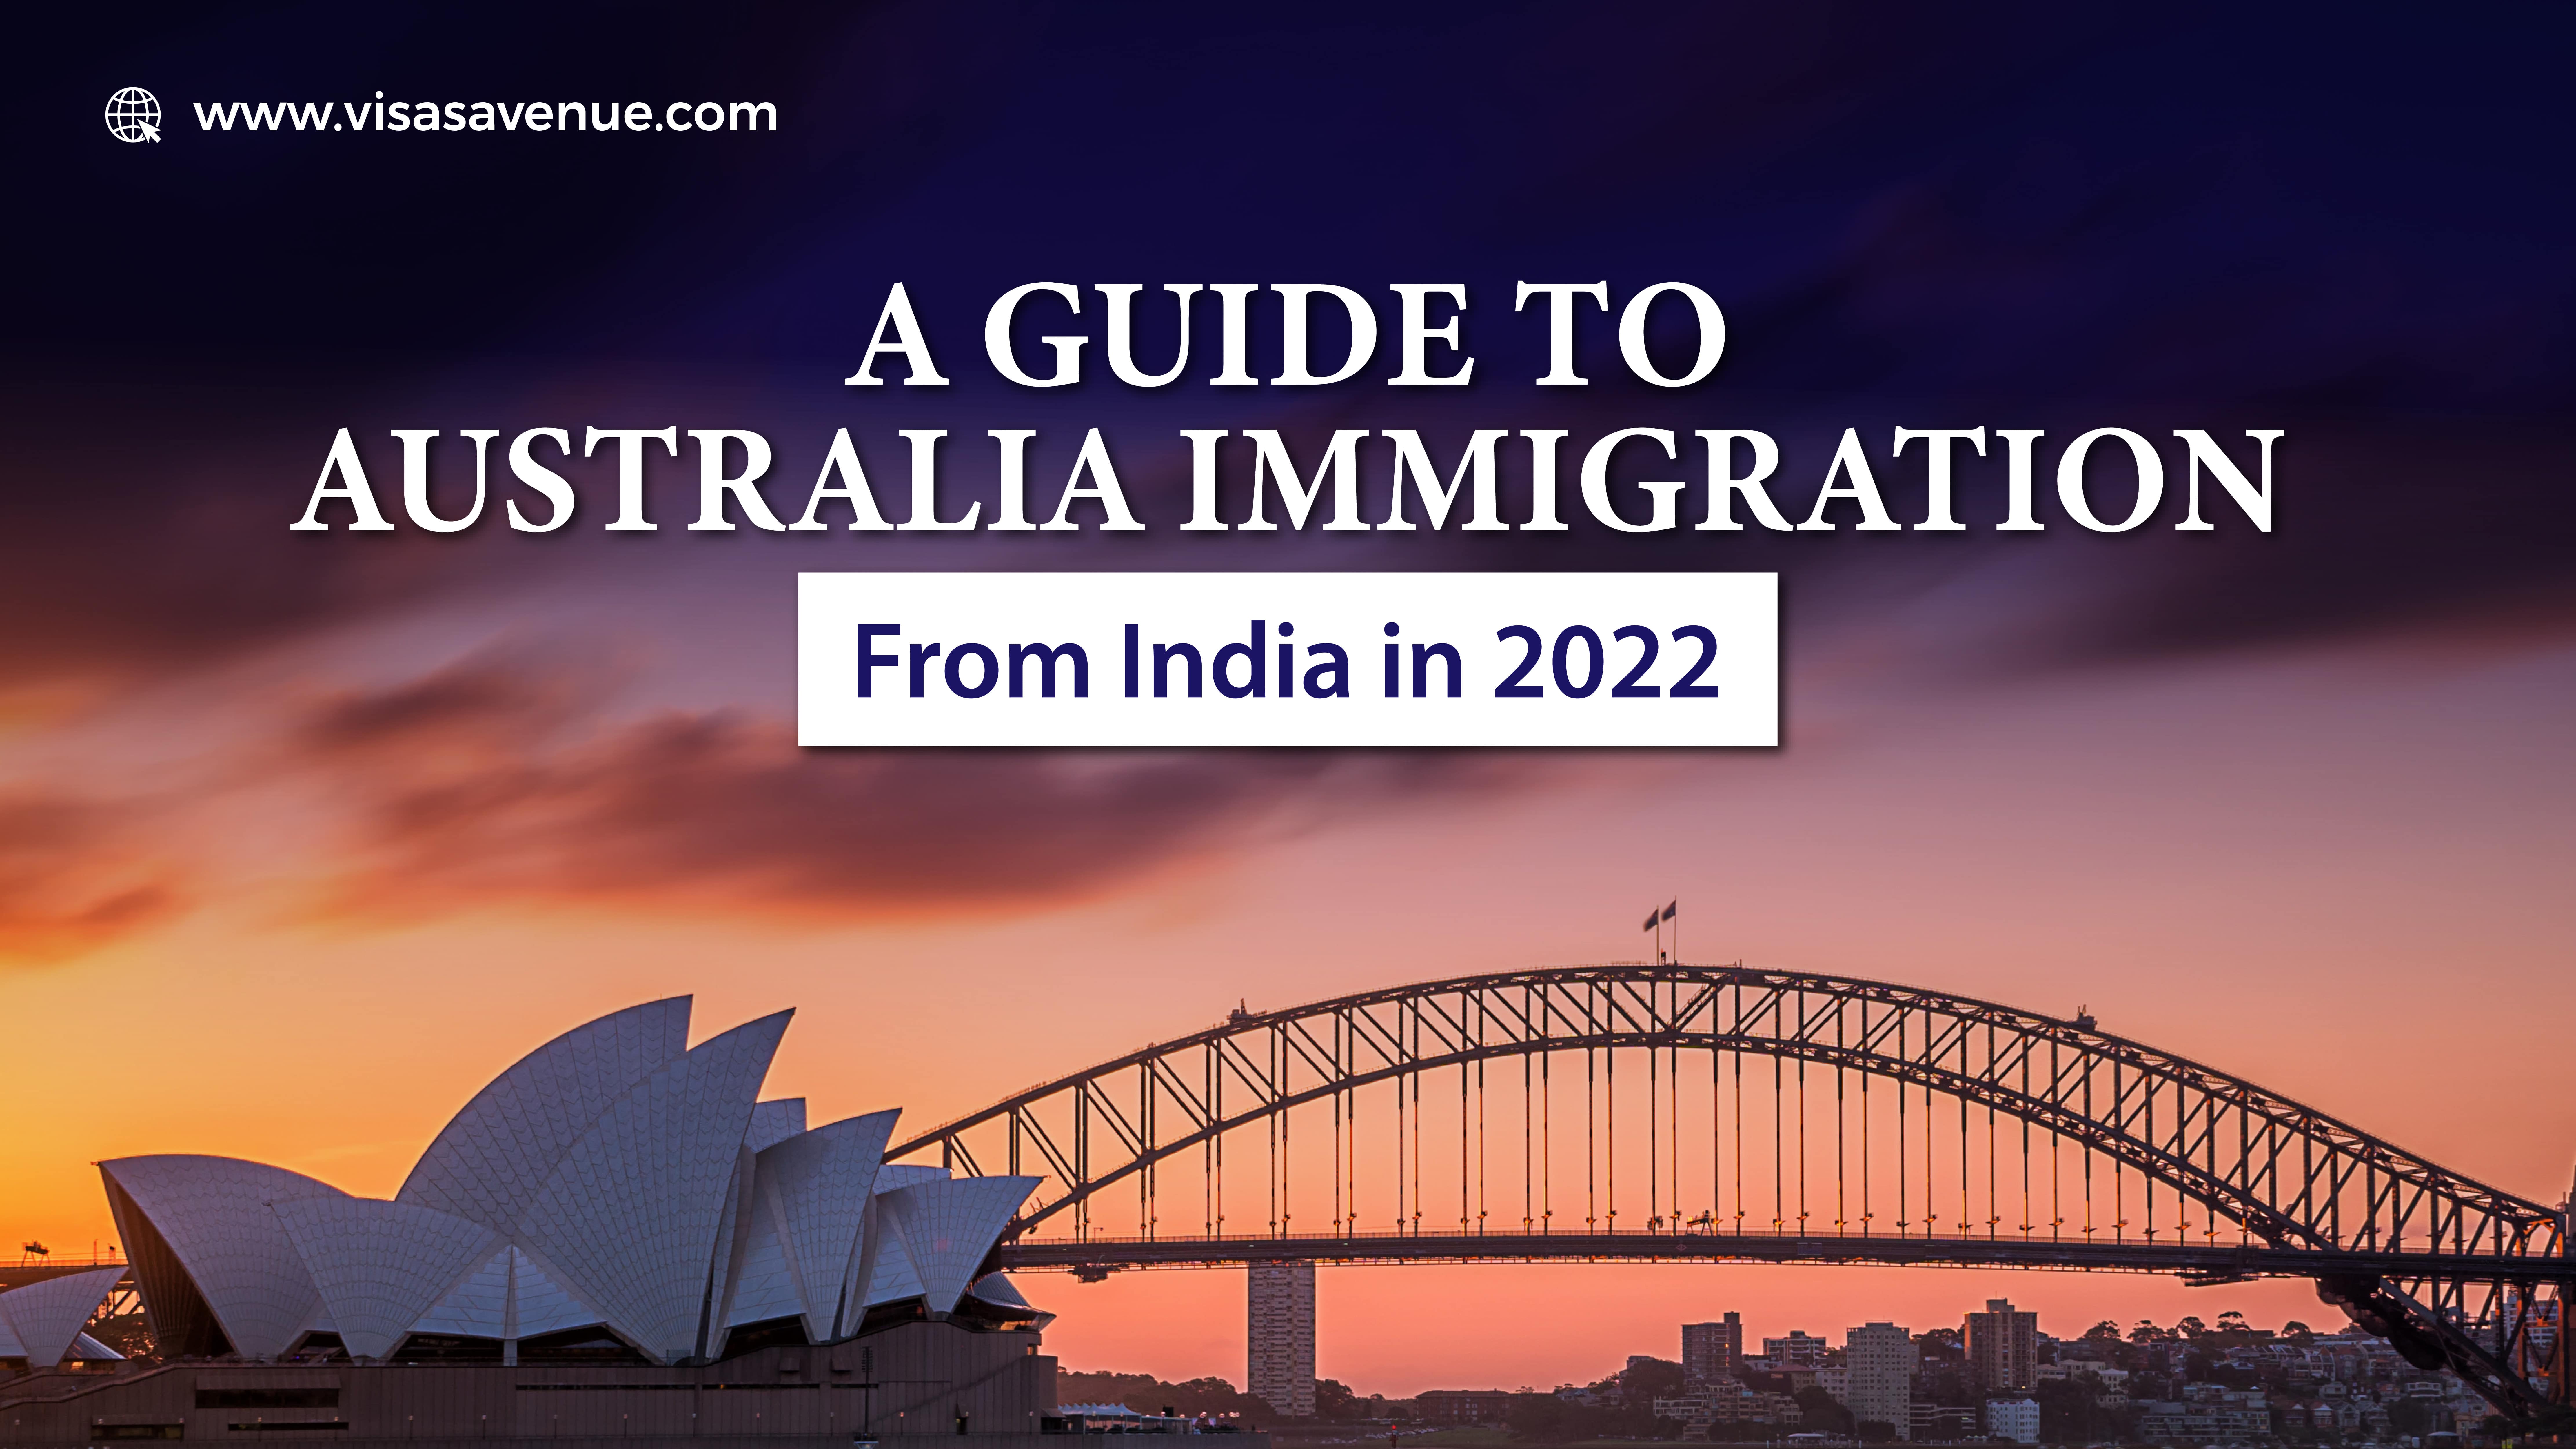 A Guide to Australia Immigration from India in 2022